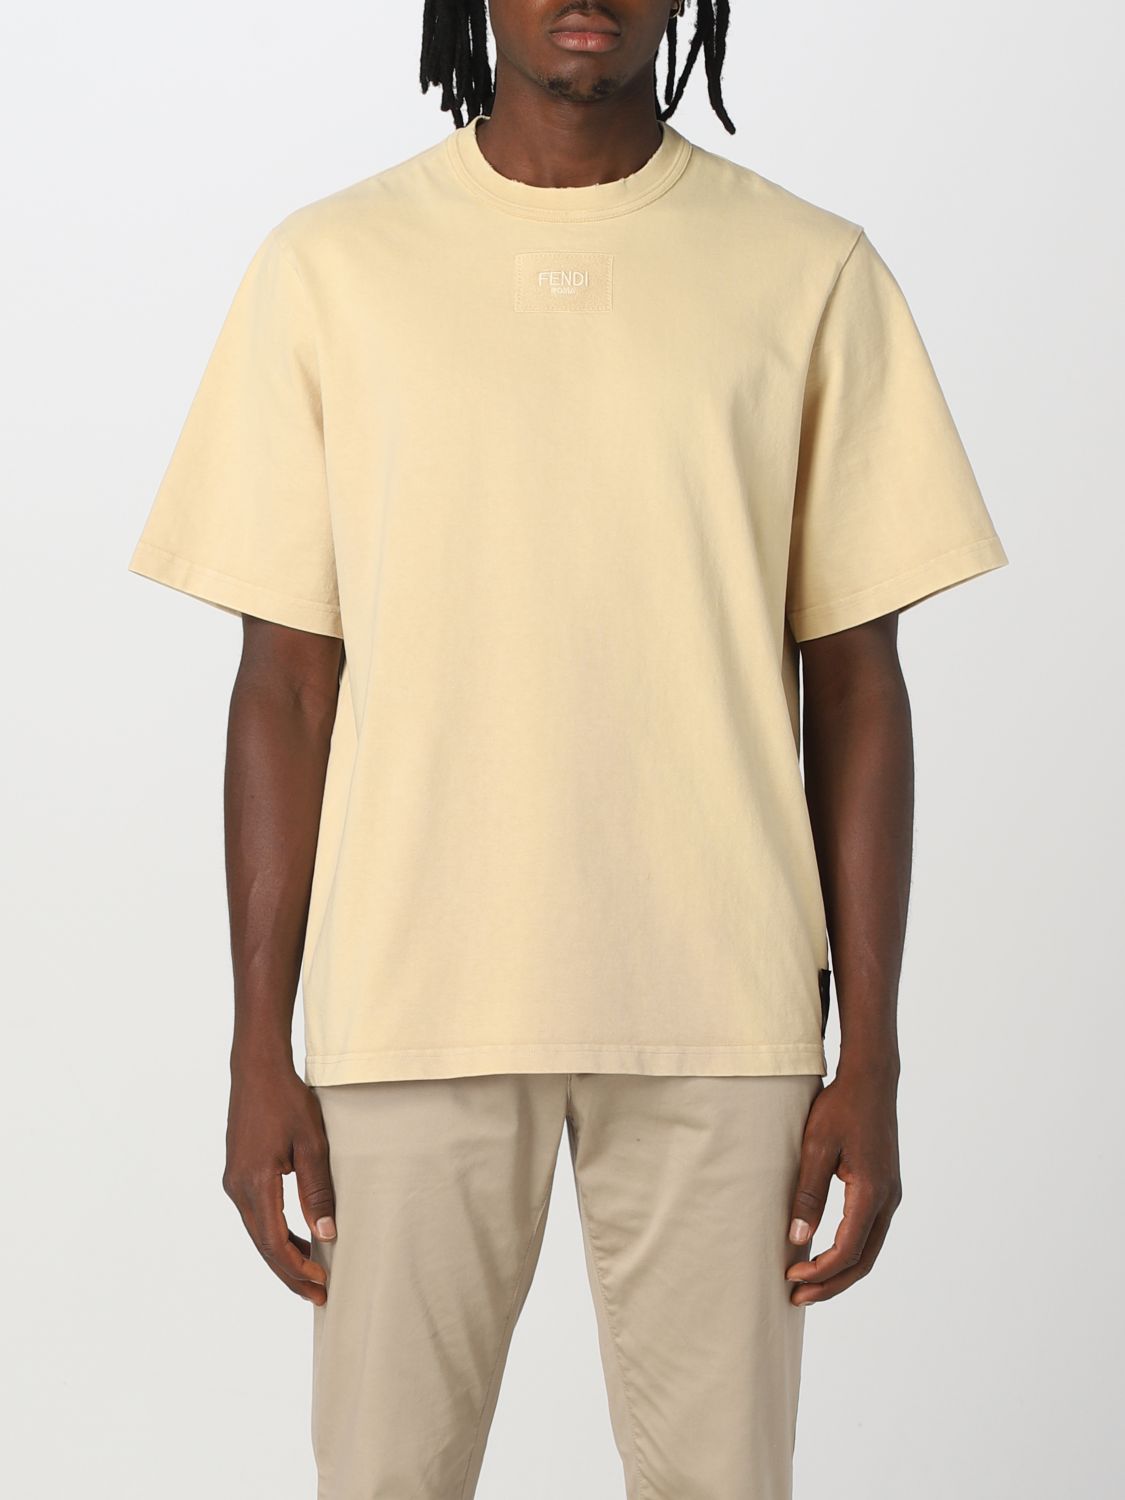 FENDI: cotton T-shirt with embroidered logo patch - Beige | Fendi t ...